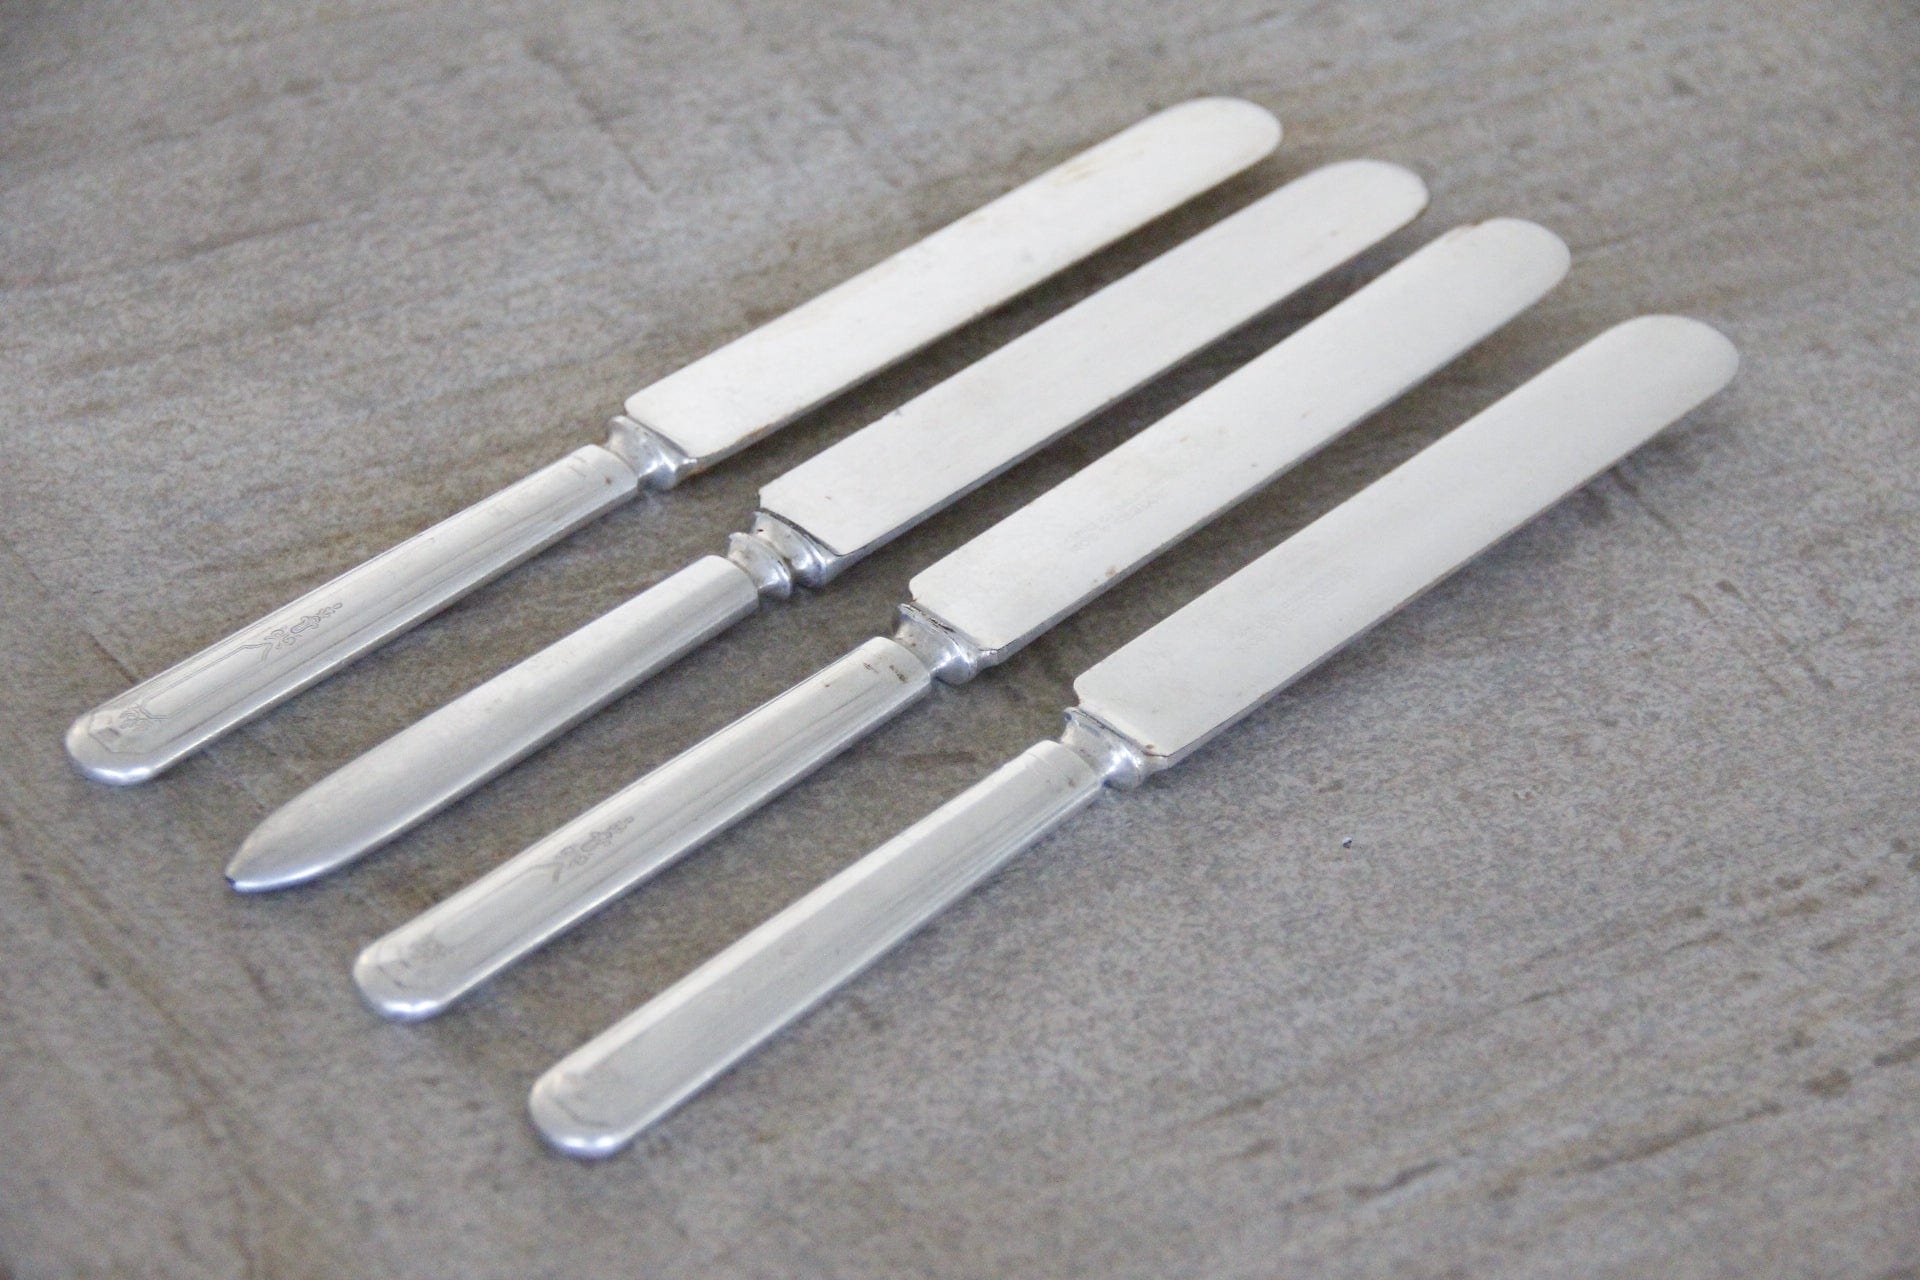 Antique Silver Plated Blunt Table Knife | Flatware 4 Mixed Pcs Tableware